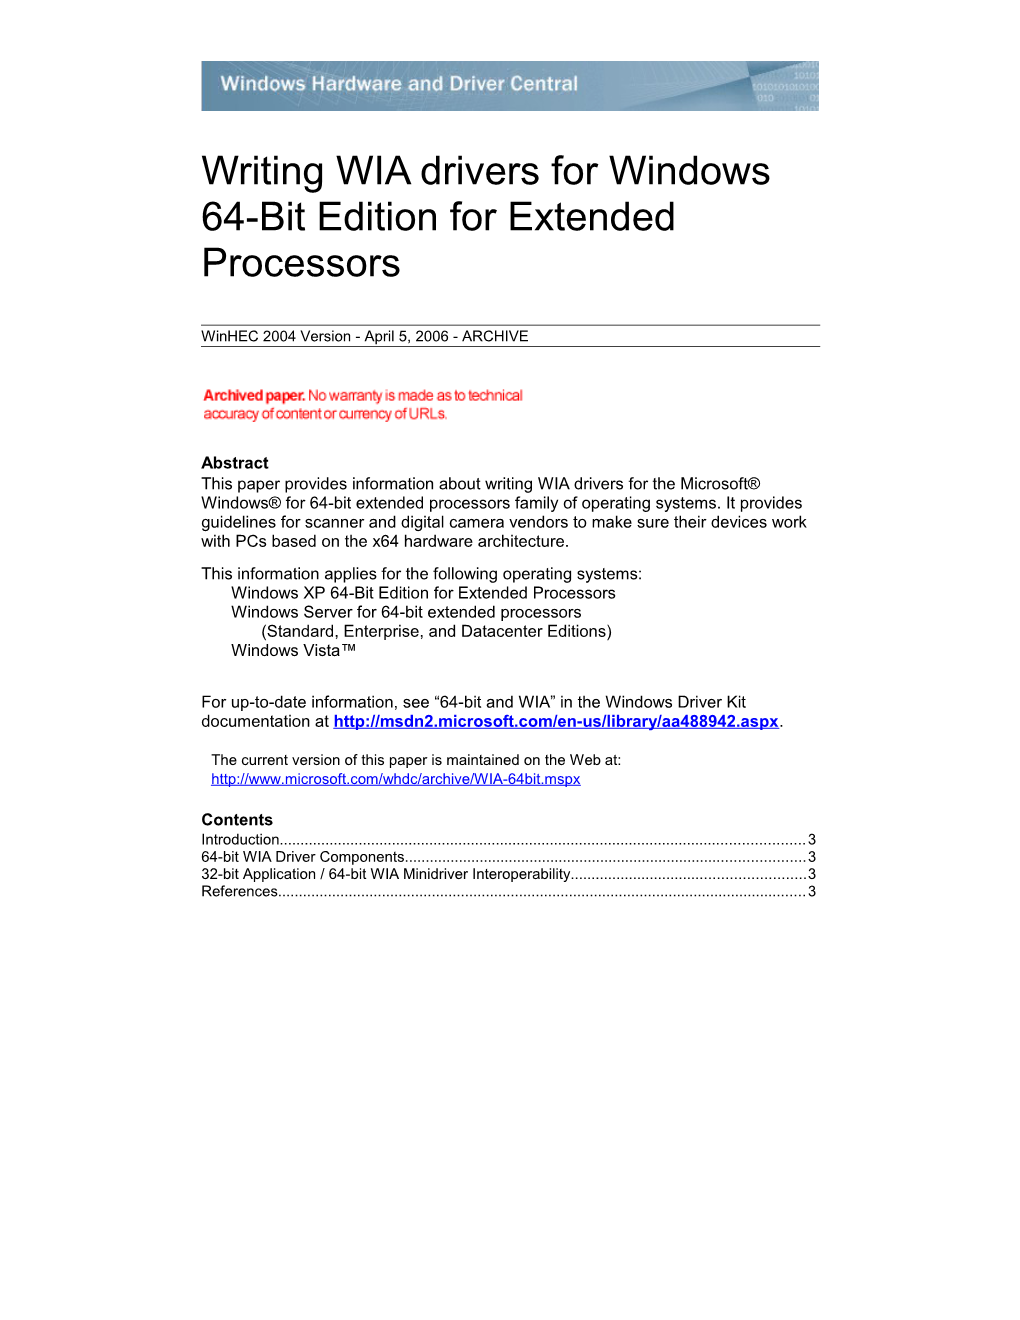 Writing WIA Drivers for Windows 64-Bit Edition for Extended Processors